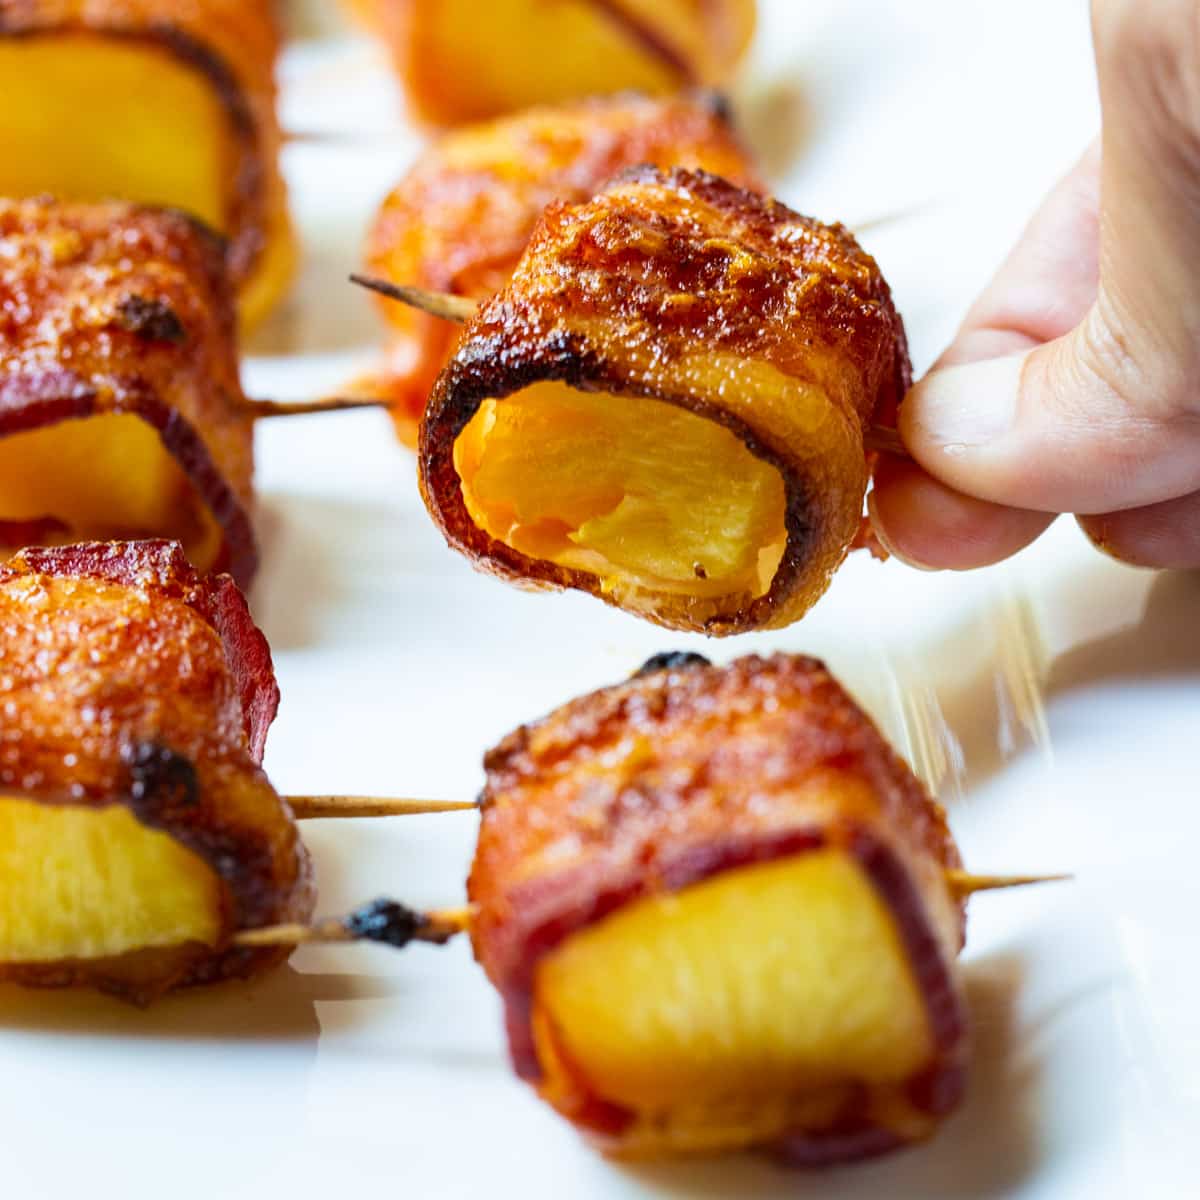 Hand picking up a Spicy Bacon Wrapped Pineapple Bite.